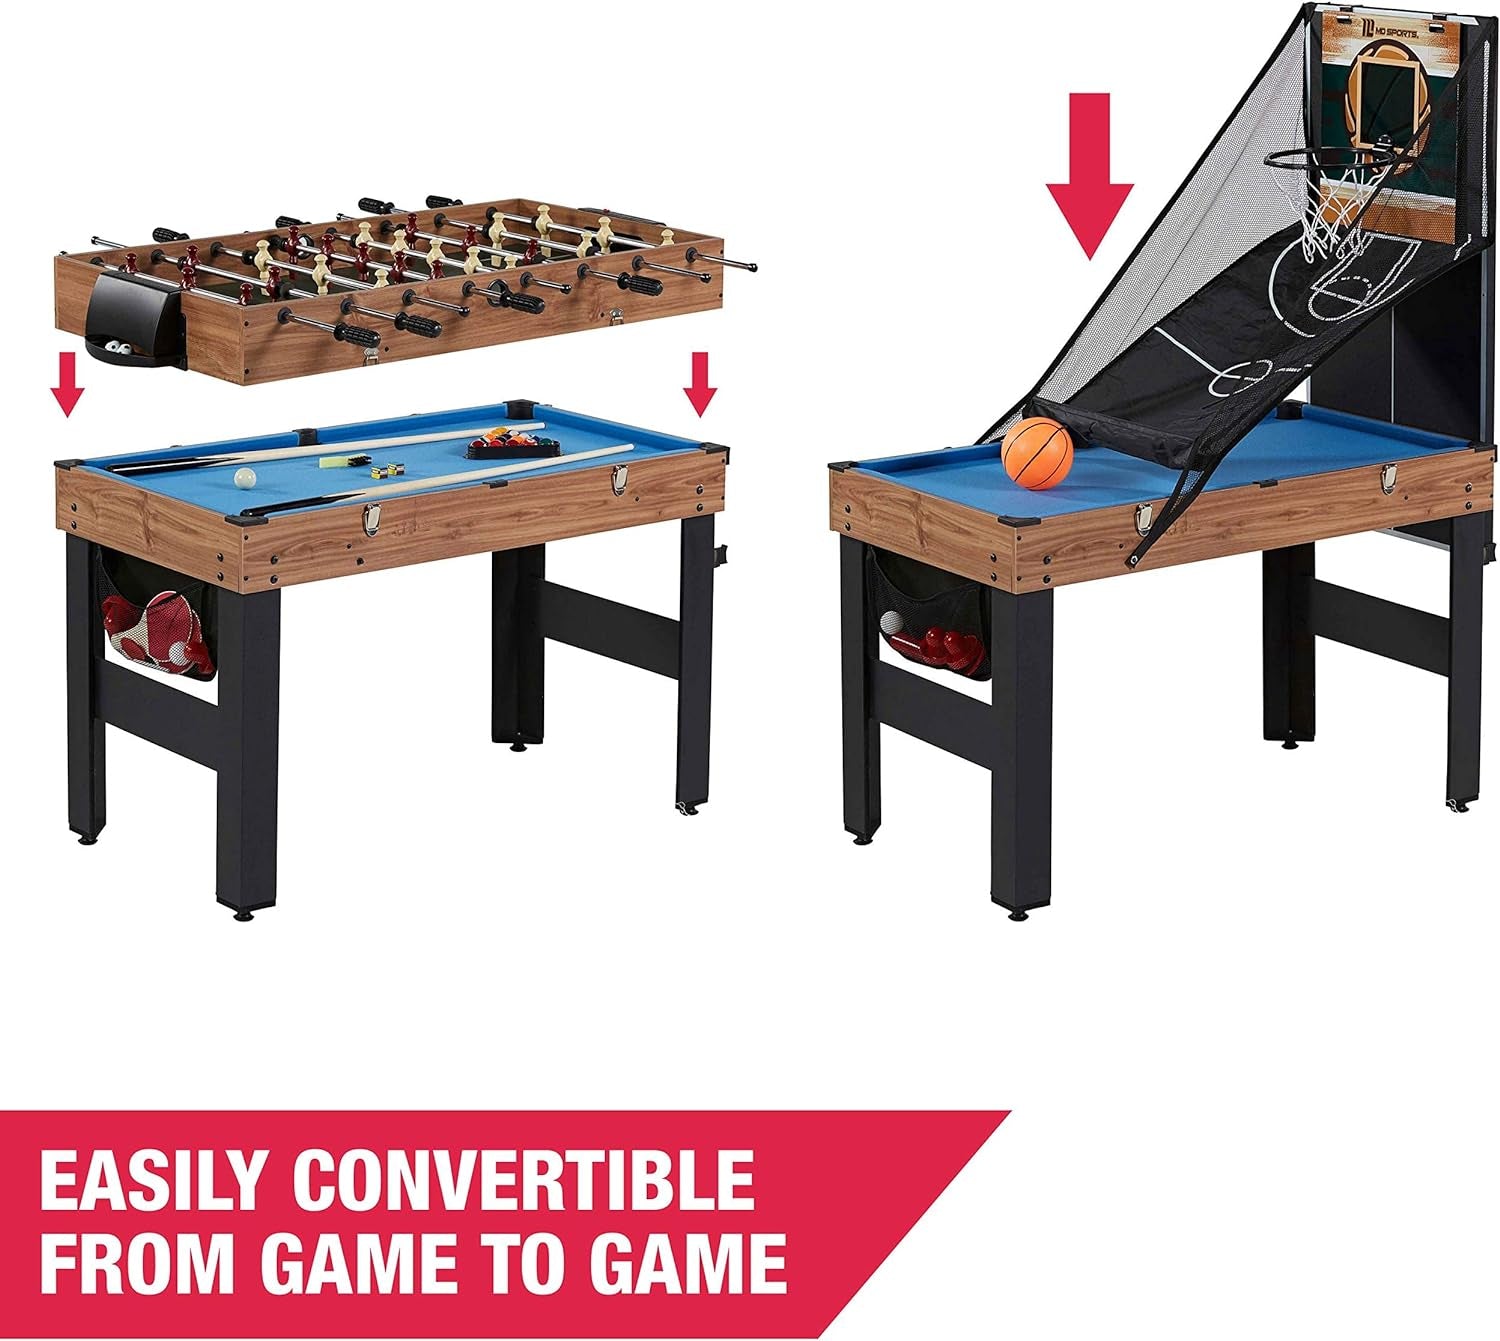 Combination Games Multiple Styles Arcade Collection, Billiards, Ping Pong, Hockey, Basketball and Foosball Combination Kit Comes with All the Basics